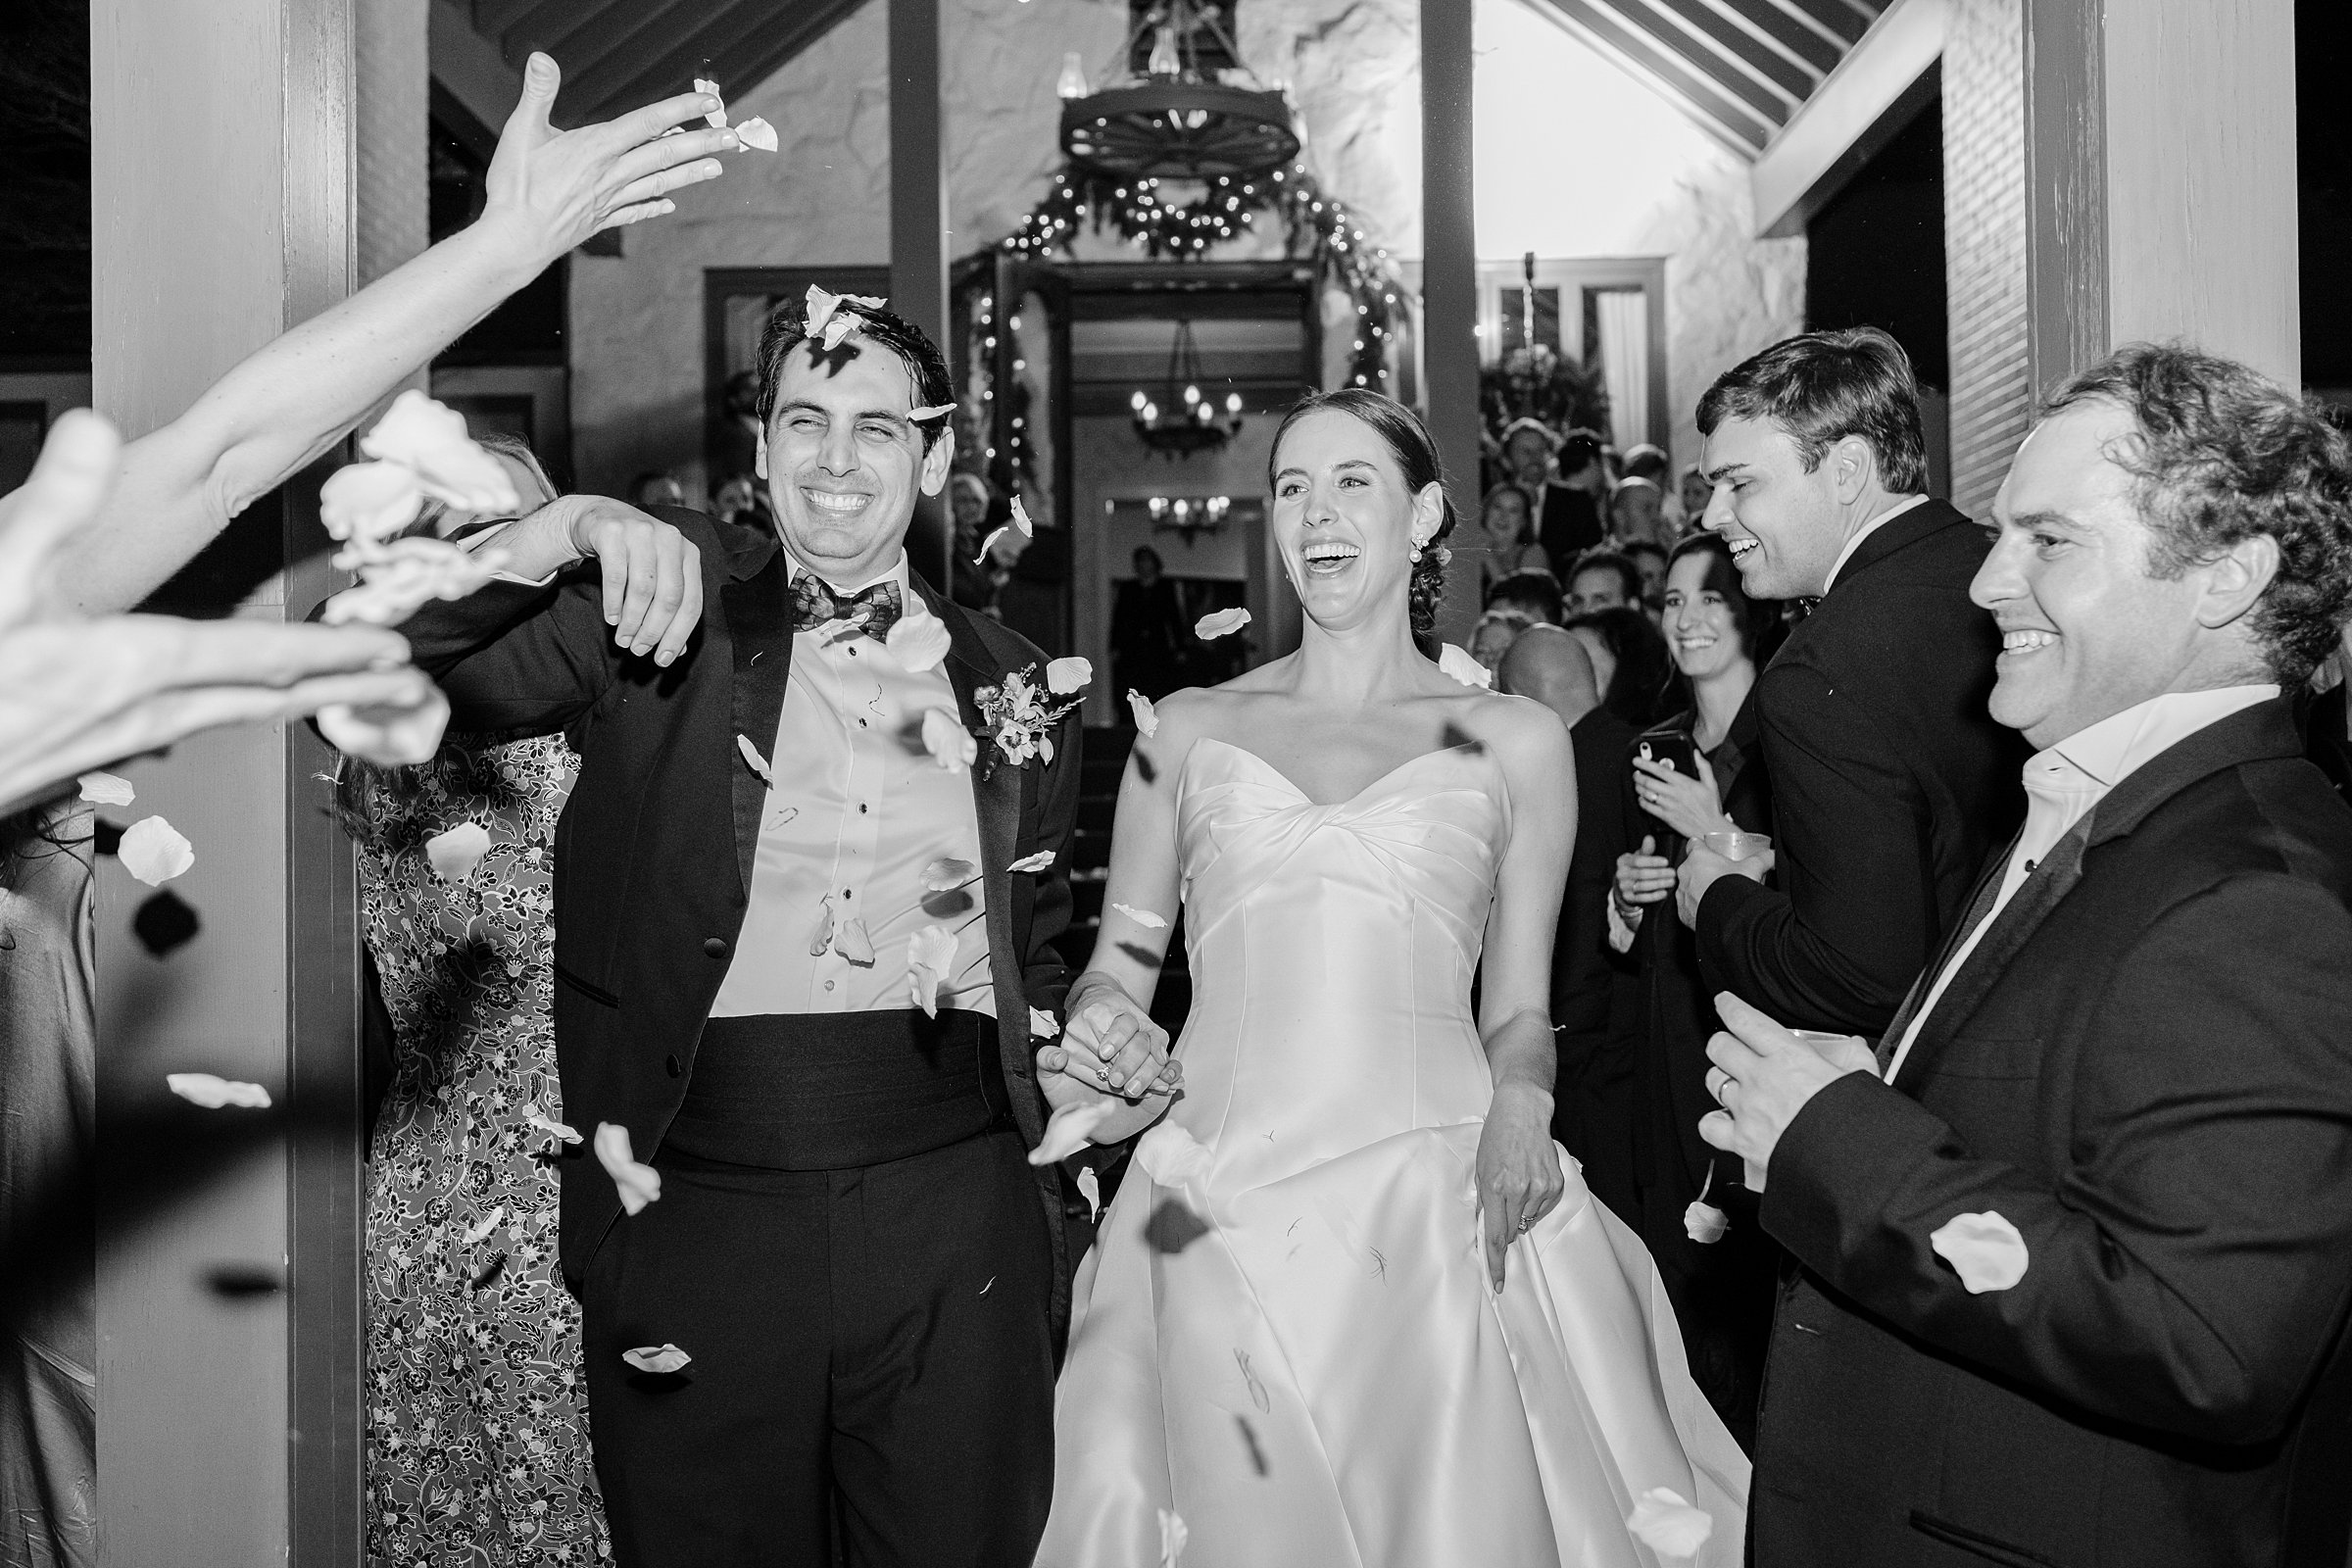 colorful winter wedding in columbus, ga - flower petal exit in black and white